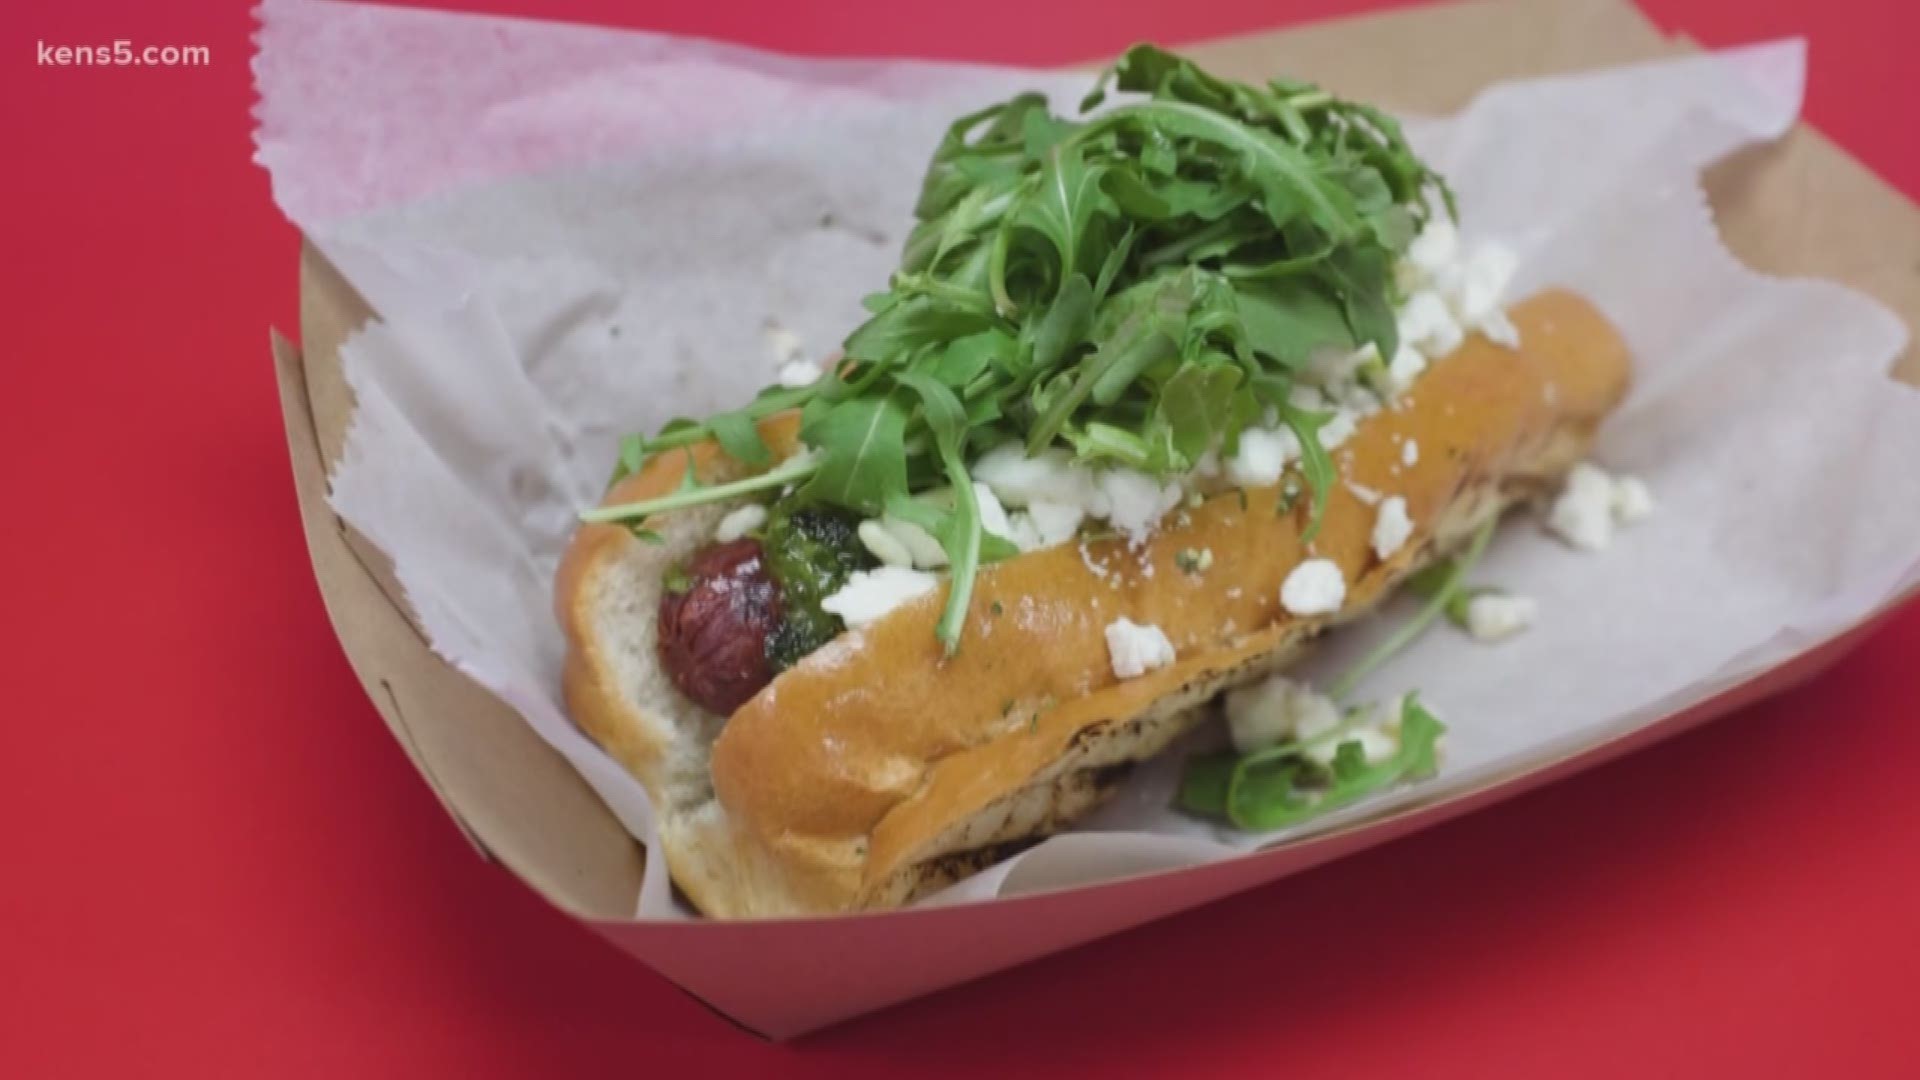 They're gonna make you a hotdog you can't refuse at The Dogfather. We're putting the promise of 'innovative edibles' to the test.